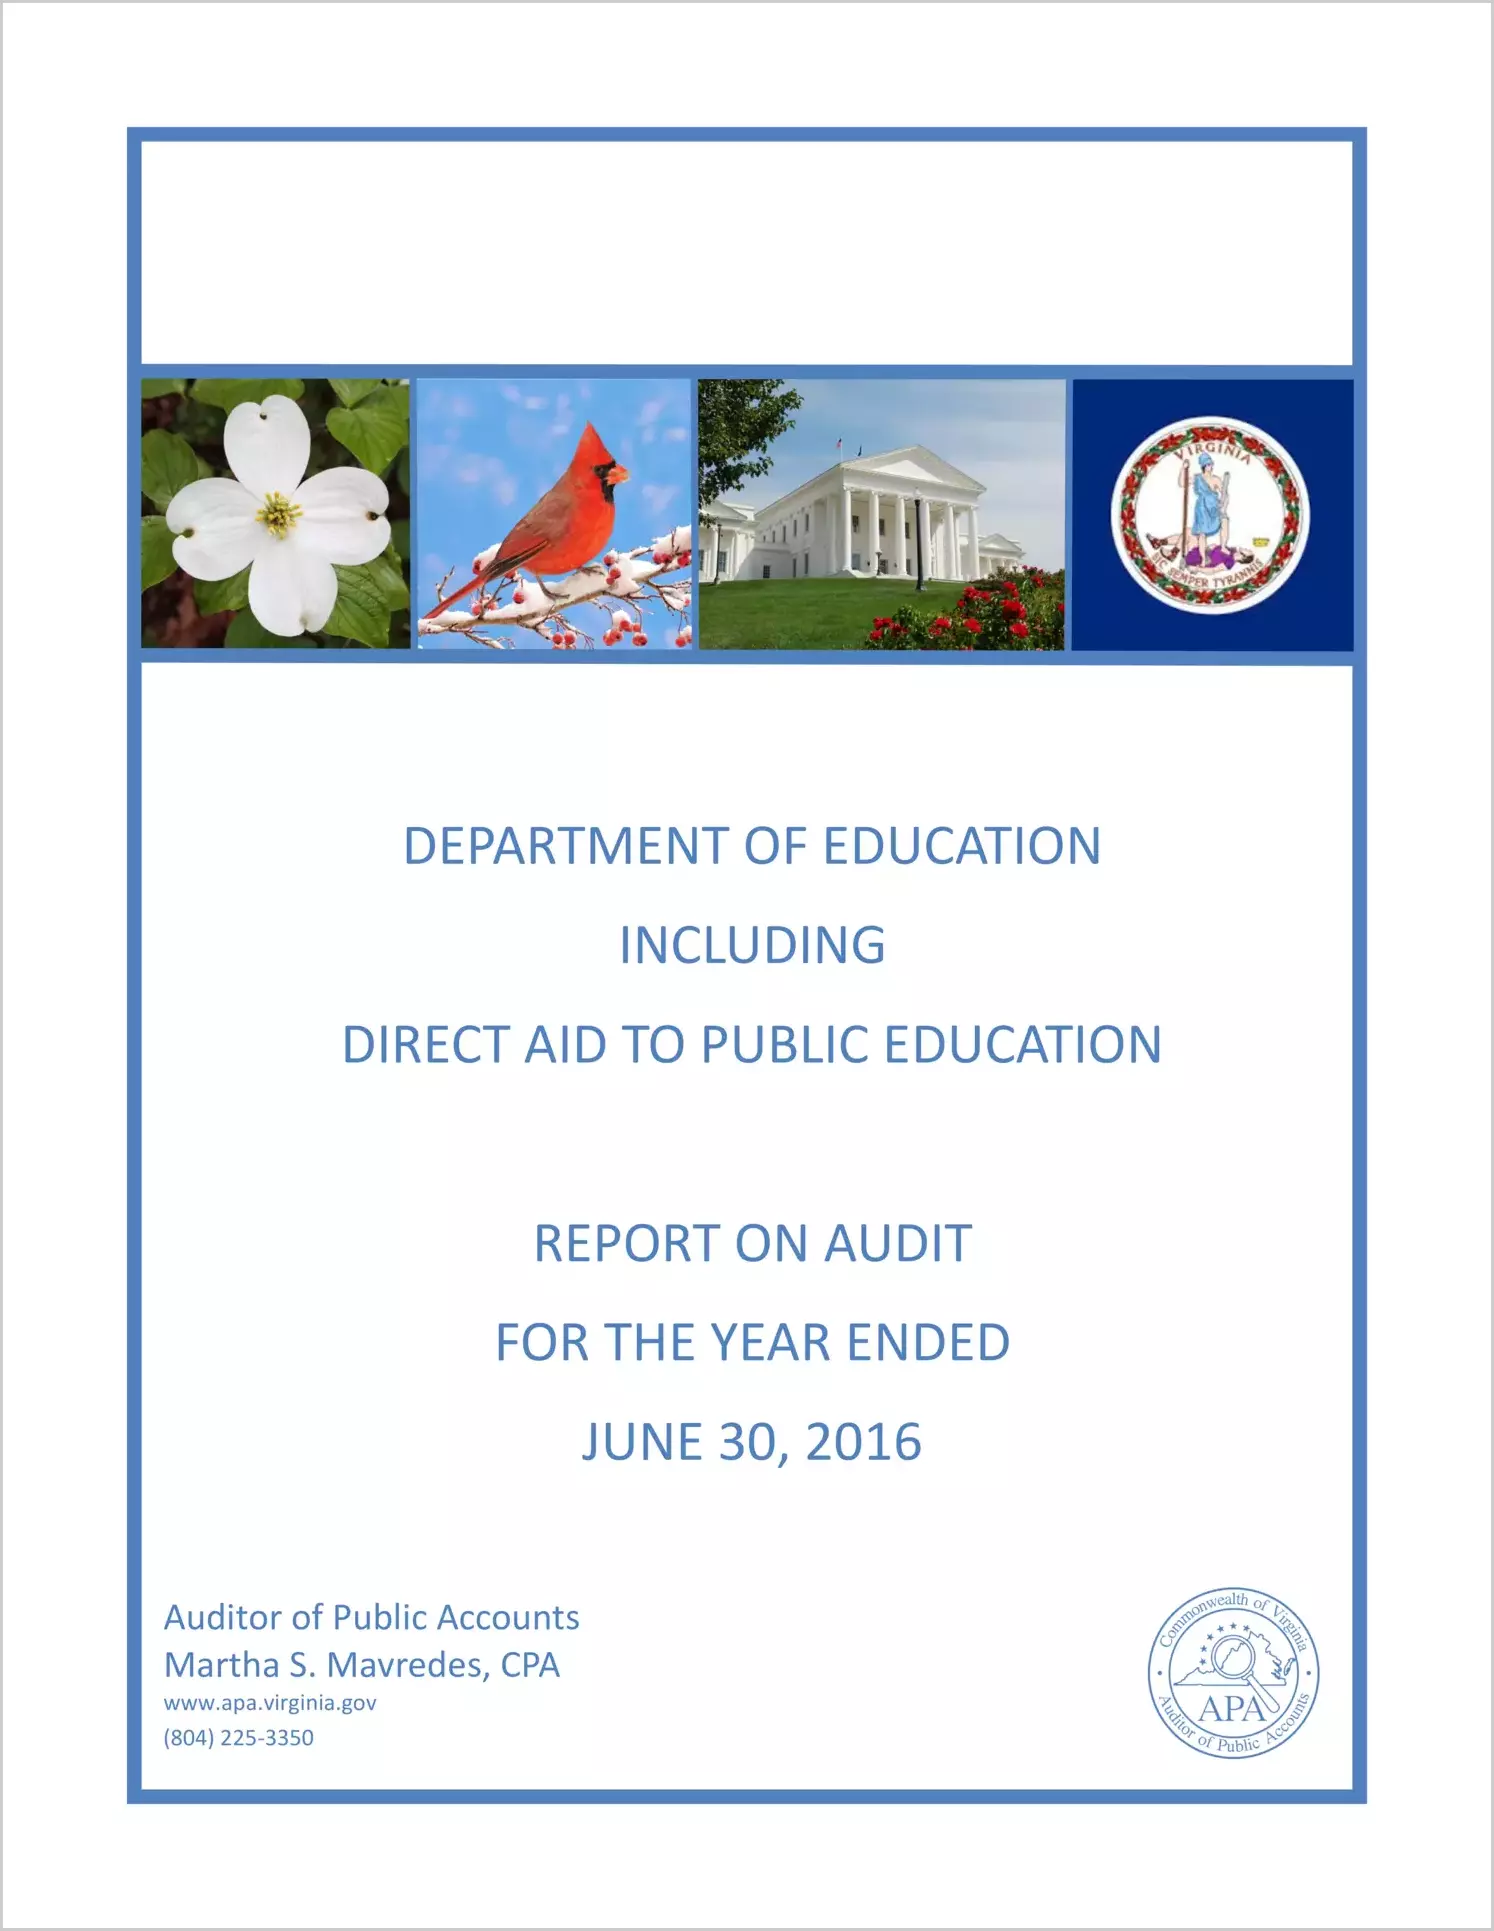 Department of Education Including Direct Aid to Public Education for the year ended June 30, 2016